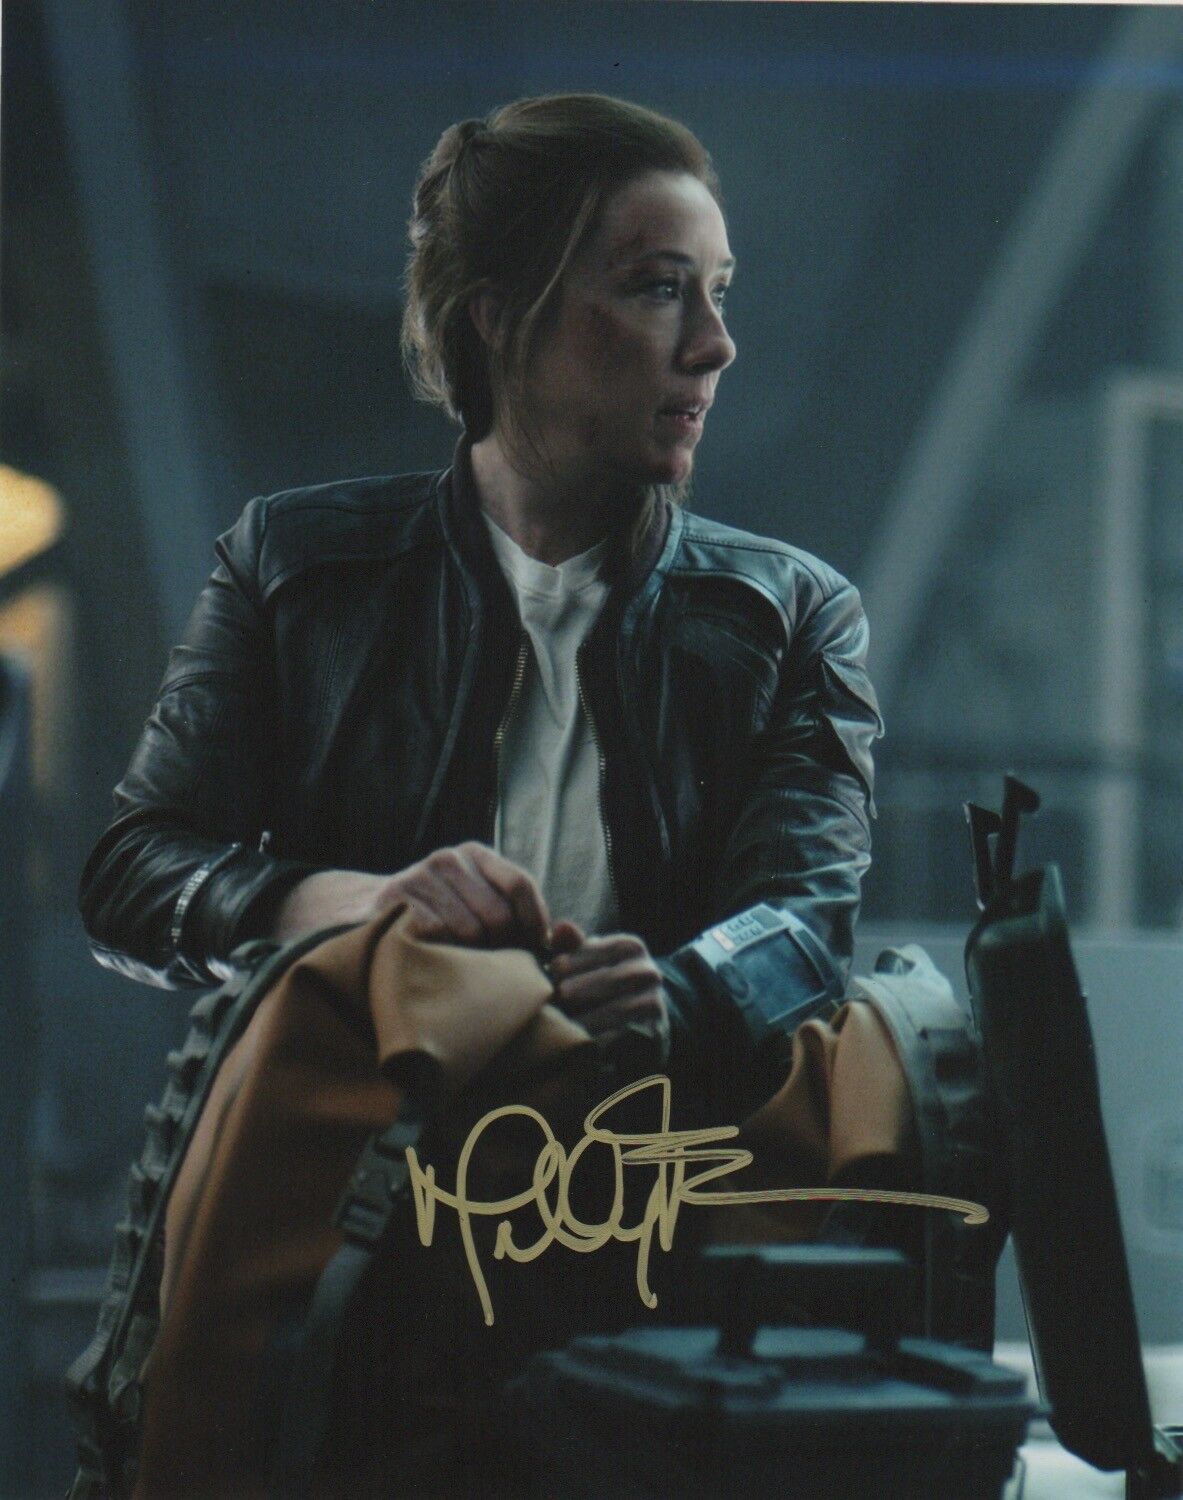 Molly Parker Lost in Space Signed Autograph 8x10 Photo #2 - Outlaw Hobbies Authentic Autographs